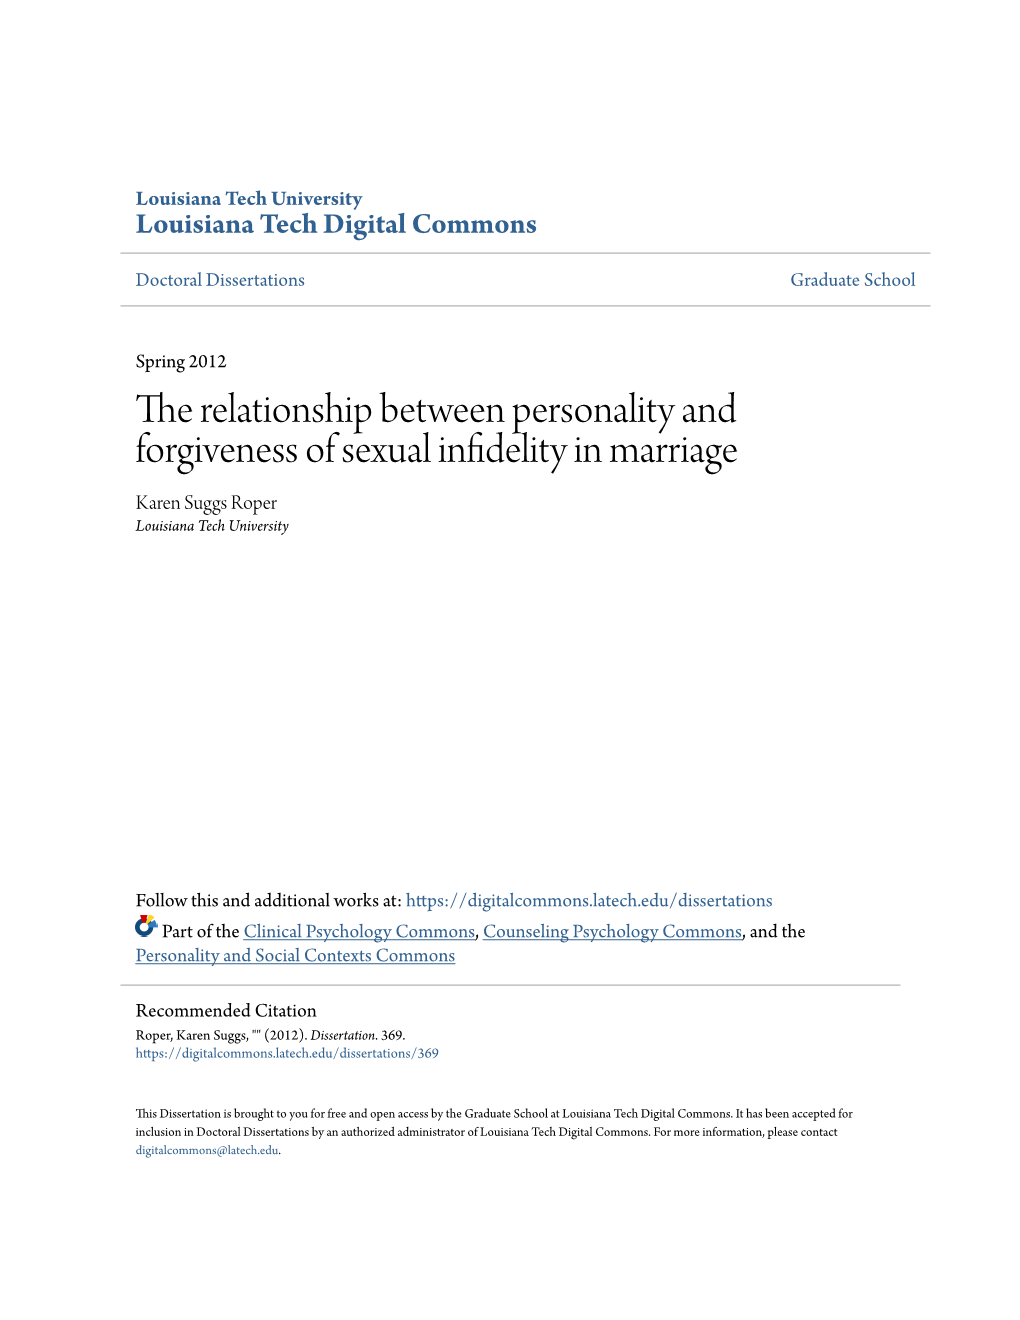 The Relationship Between Personality and Forgiveness of Sexual Infidelity in Marriage